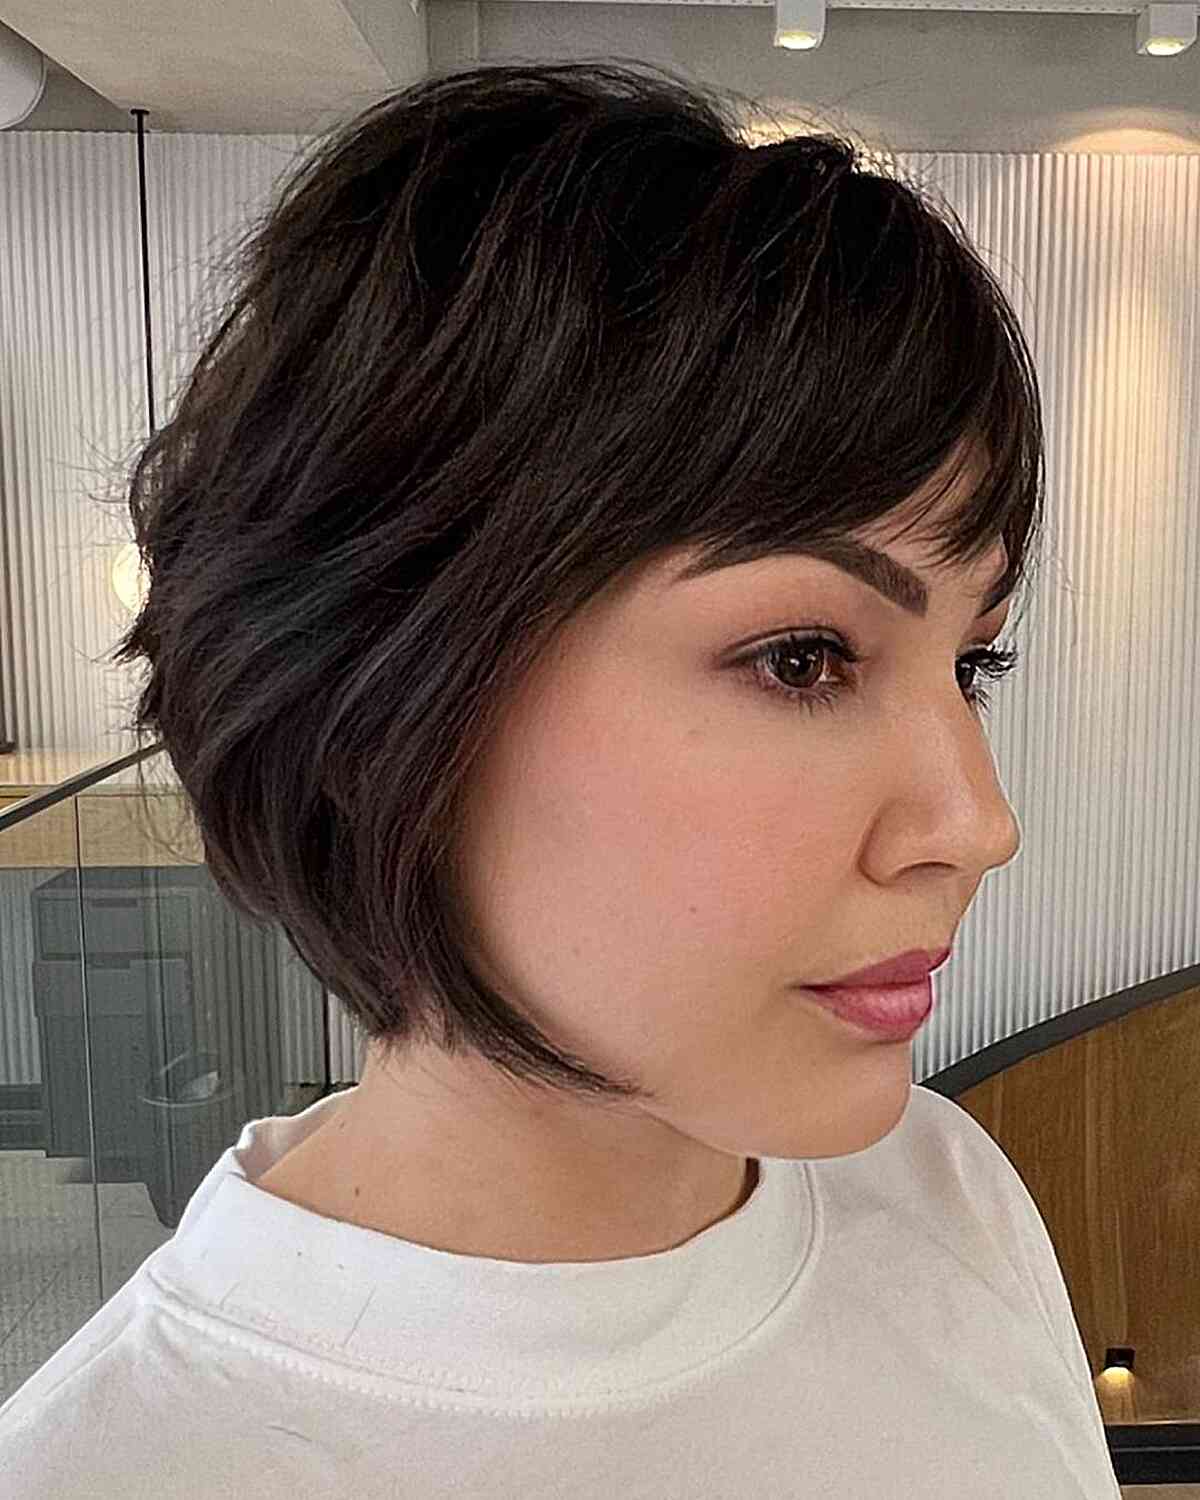 Short A-Line Bobbed Hair with Jagged Layers and Bangs for Fine Hair